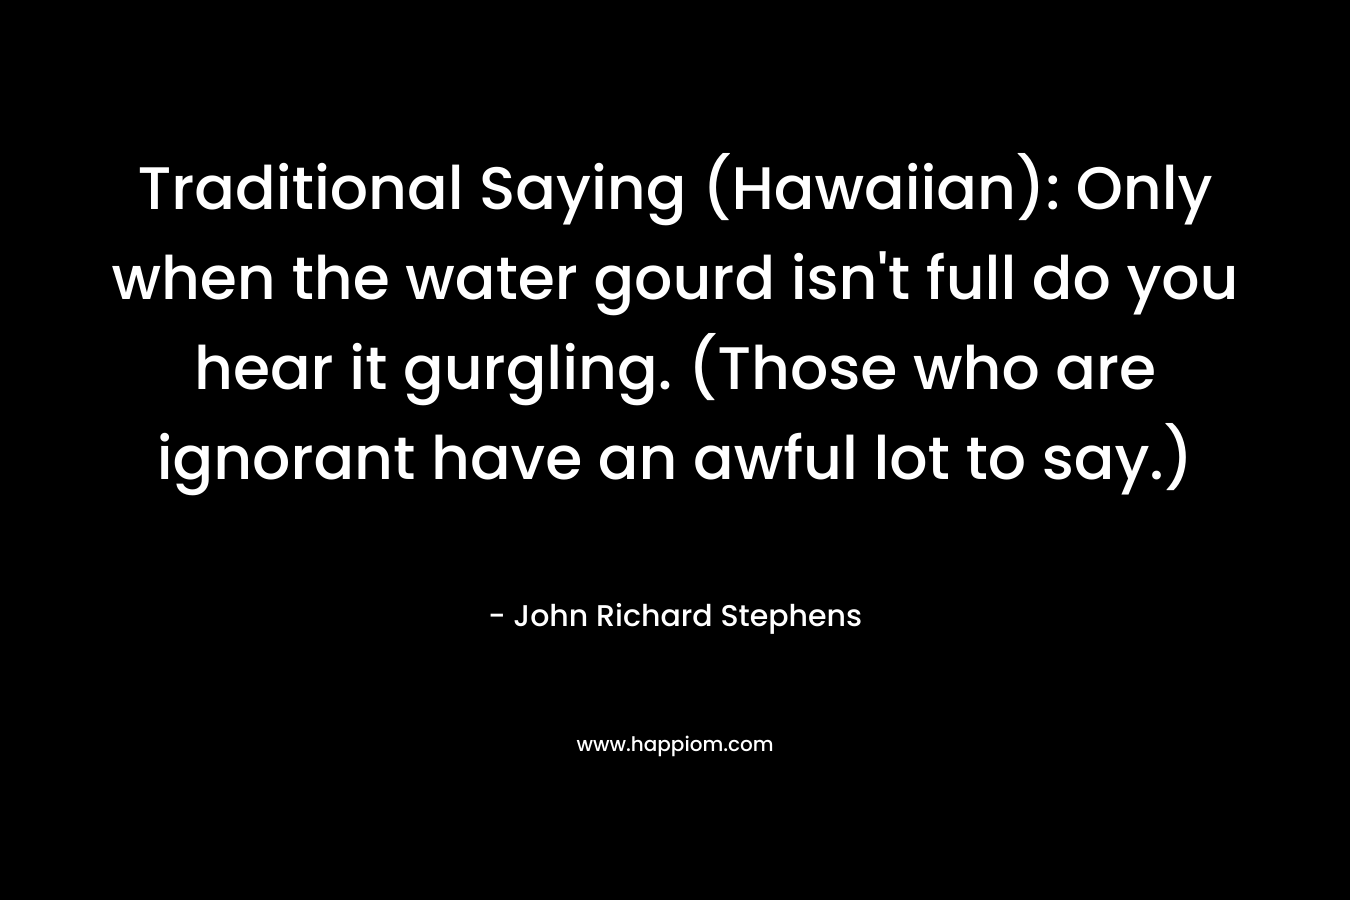 Traditional Saying (Hawaiian): Only when the water gourd isn't full do you hear it gurgling. (Those who are ignorant have an awful lot to say.)